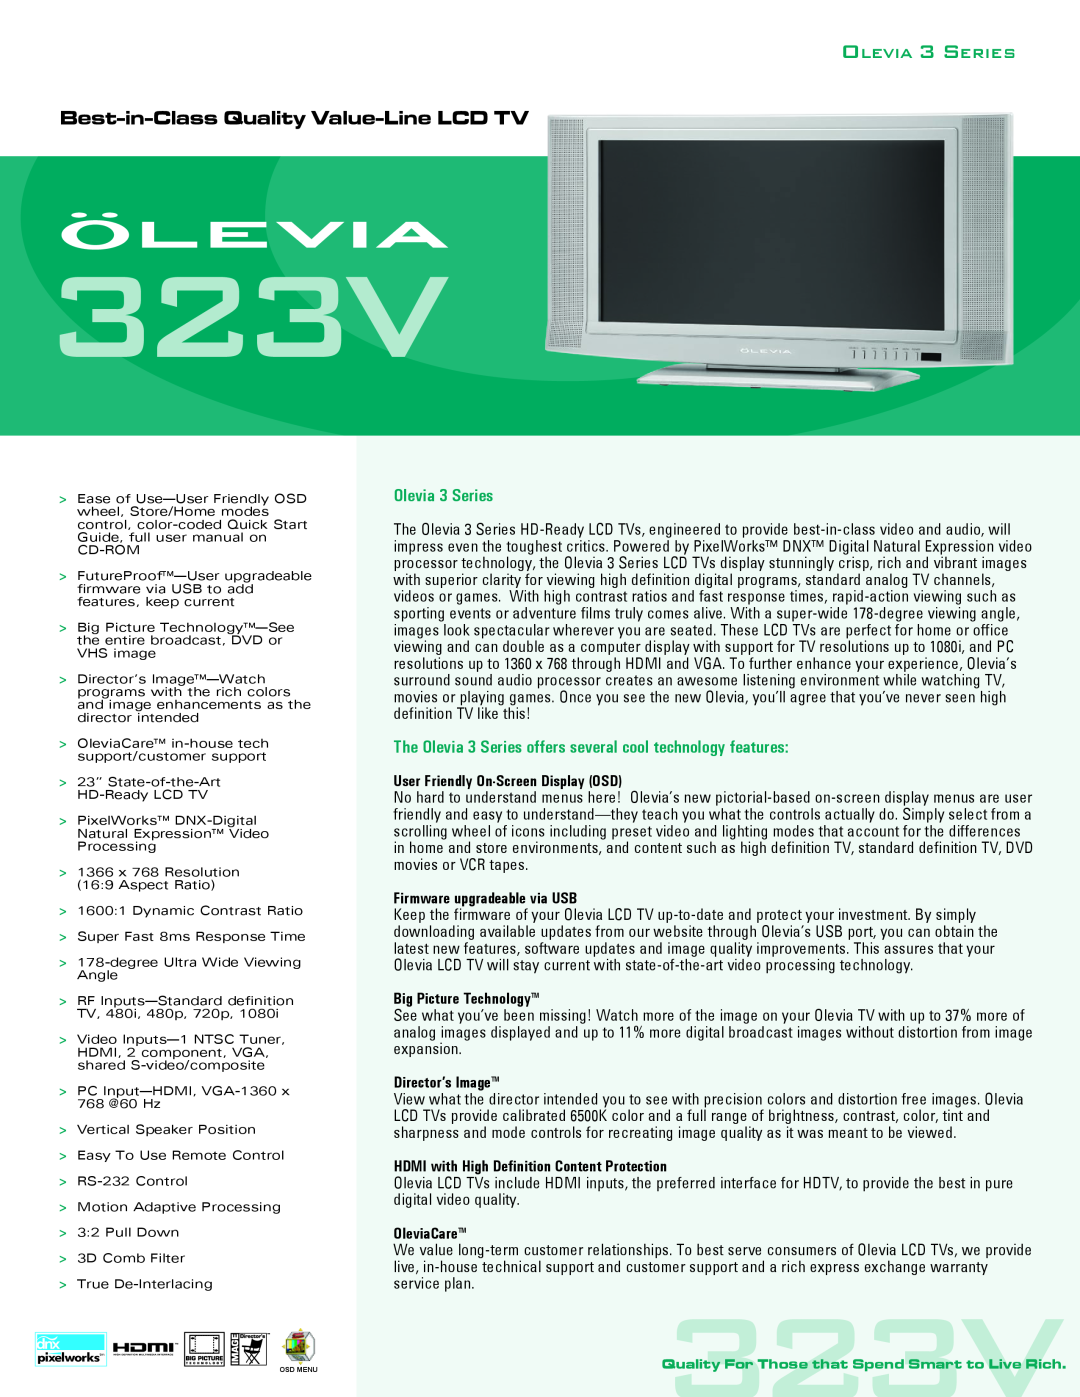 Brilliant Label 323V quick start Best-in-Class Quality Value-Line LCD TV, Olevia 3 Series, Firmware upgradeable via USB 